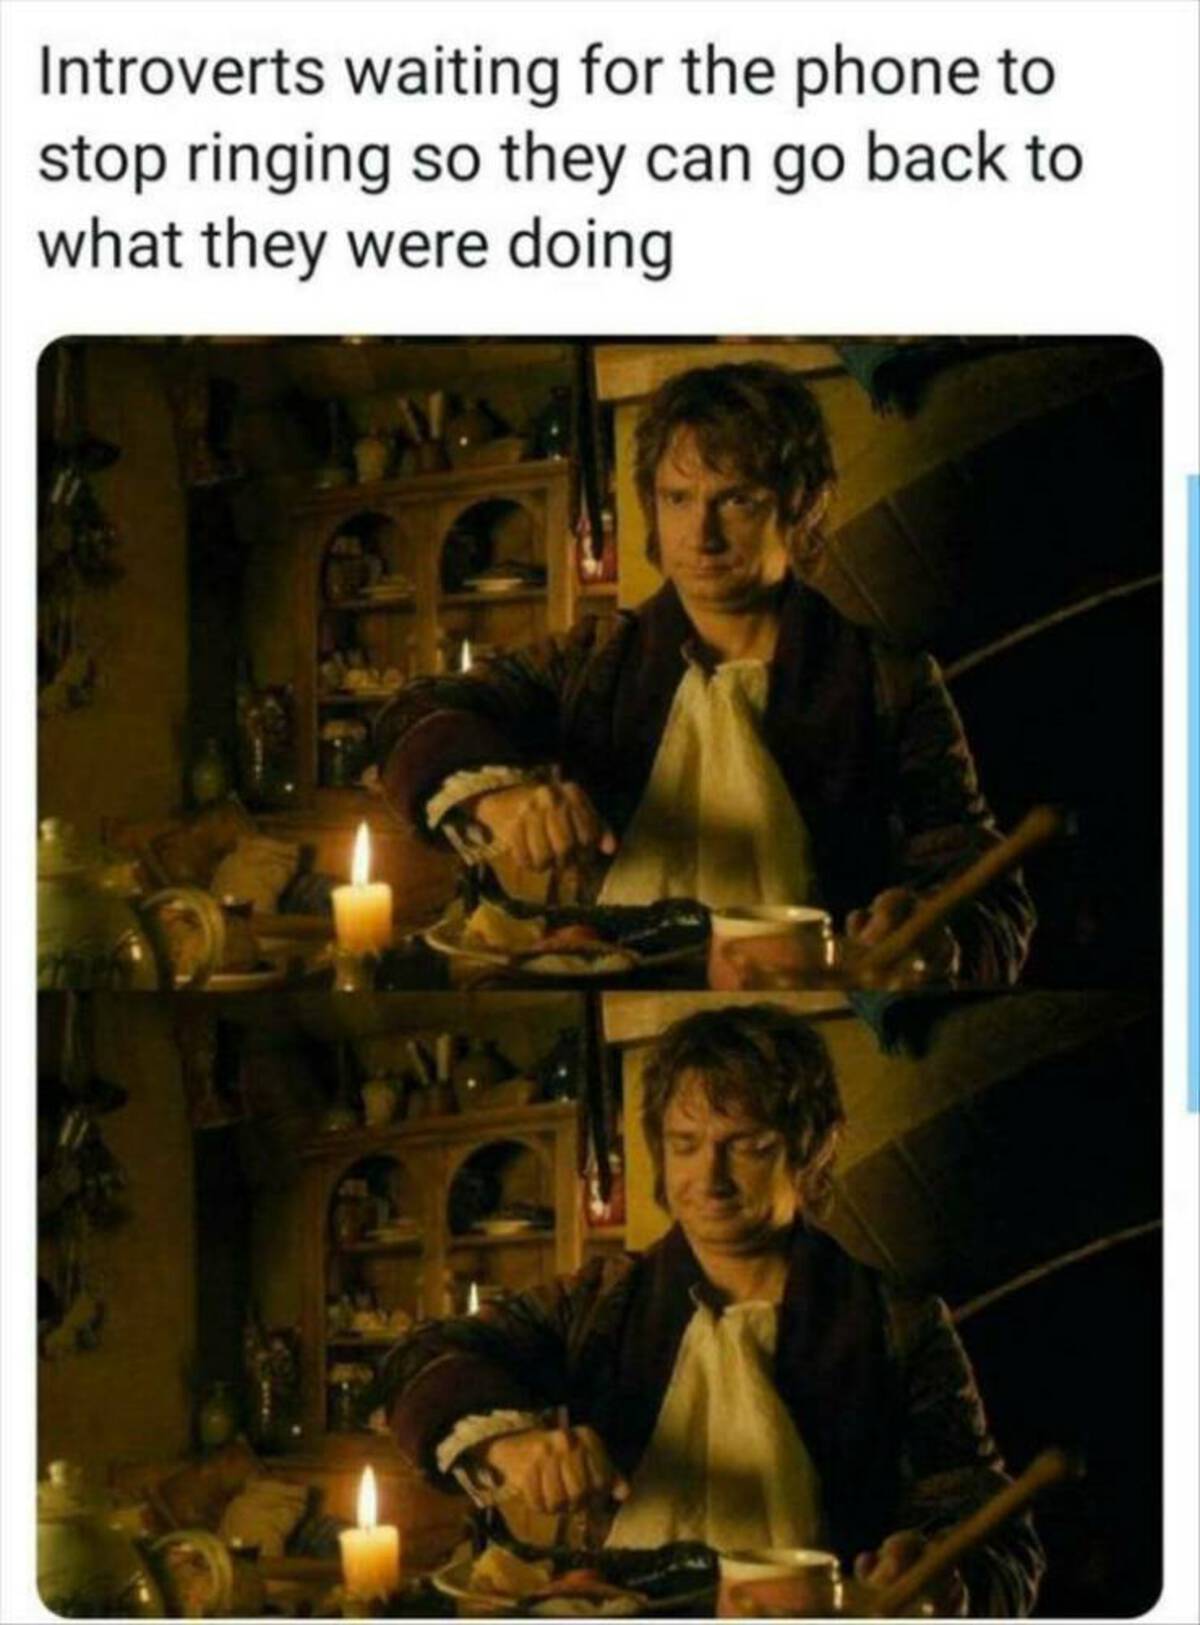 bilbo hobbit meme - Introverts waiting for the phone to stop ringing so they can go back to what they were doing